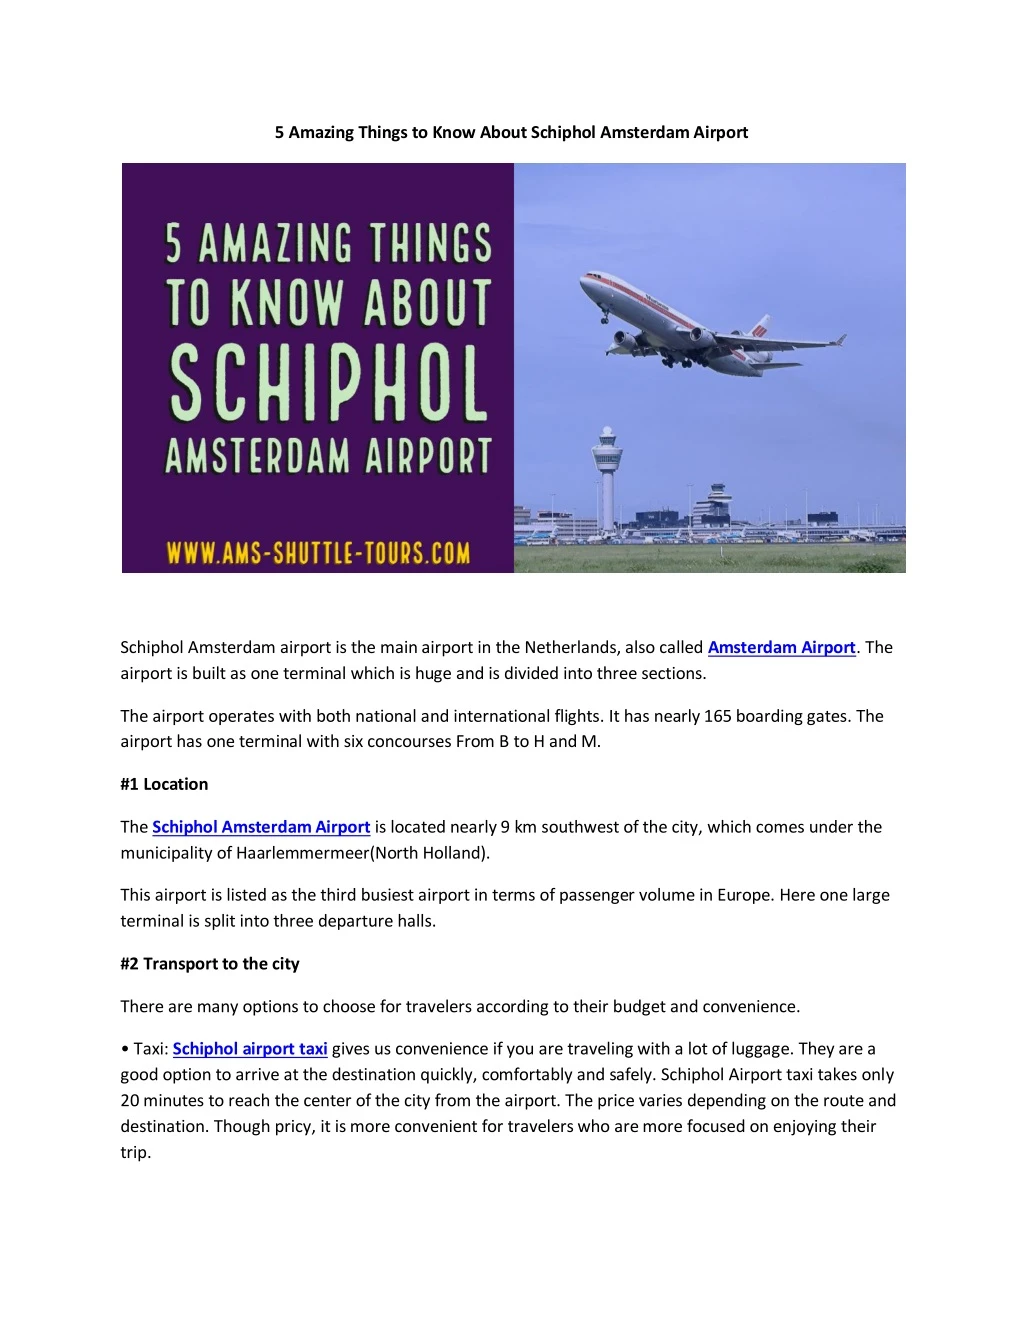 5 amazing things to know about schiphol amsterdam